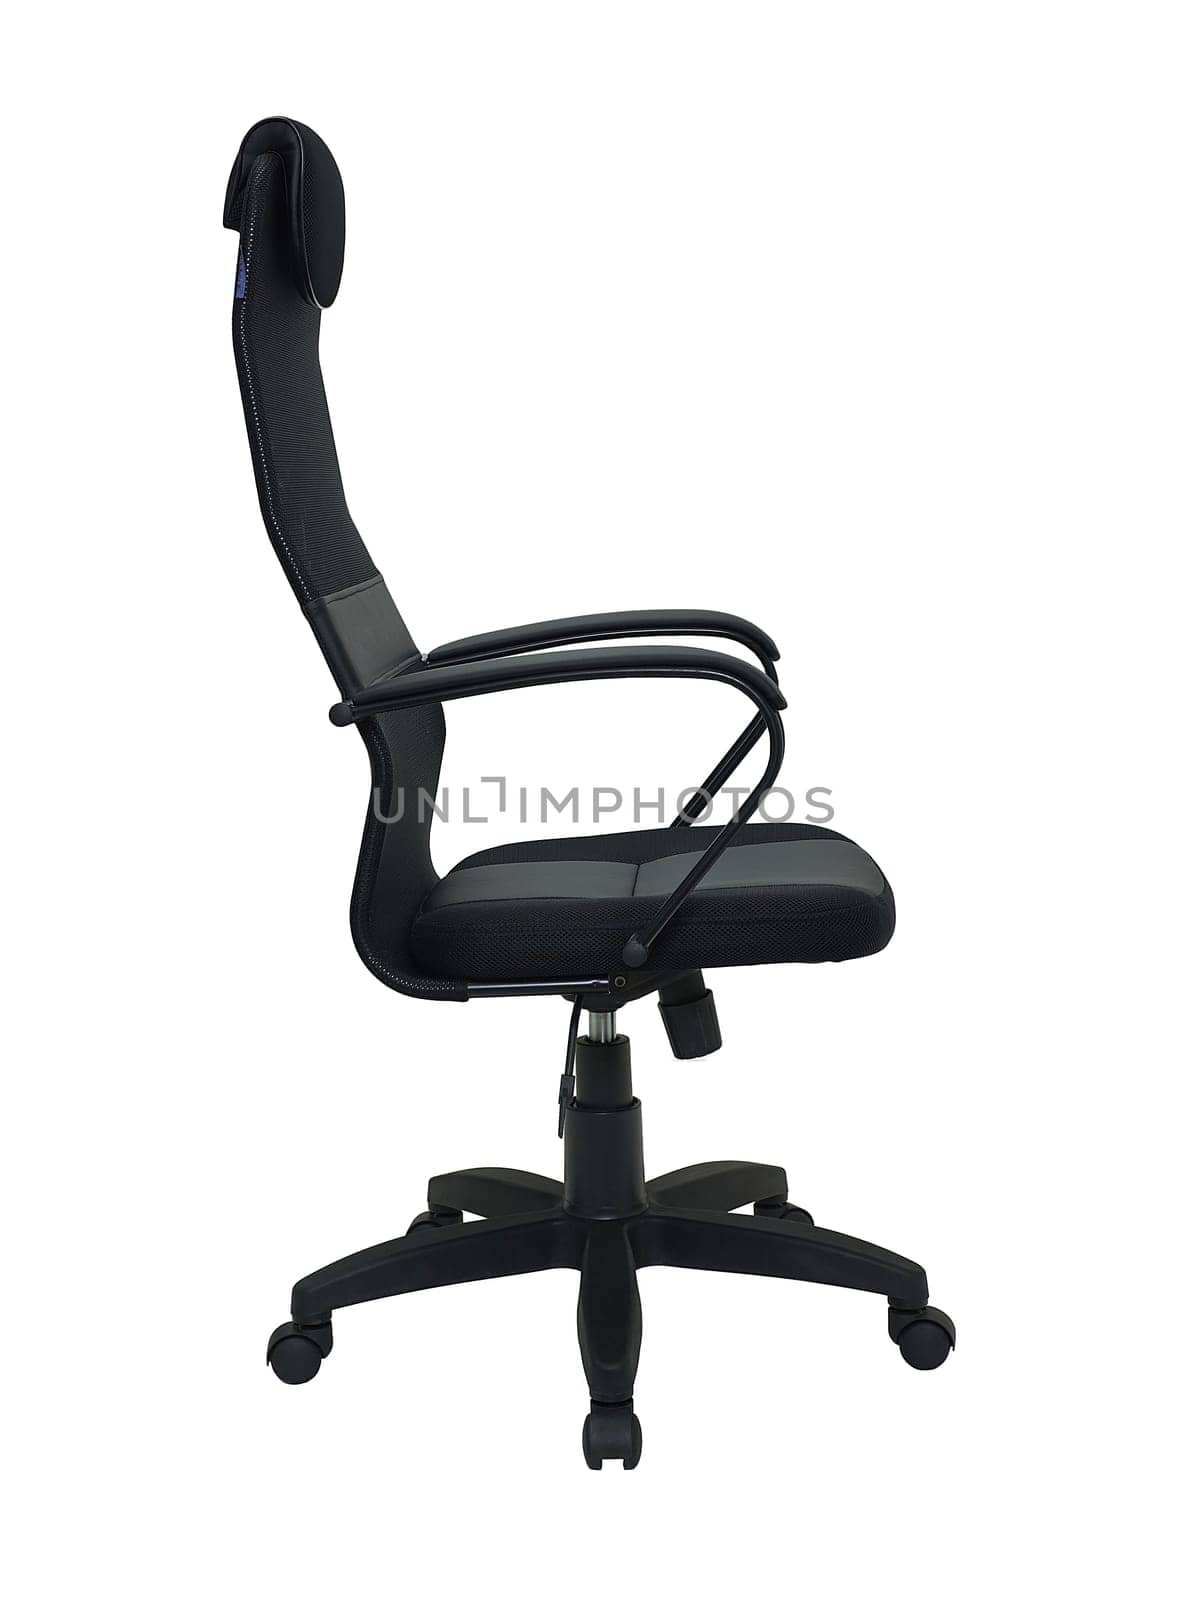 black office armchair on wheels isolated on white background, side view. furniture in minimal style